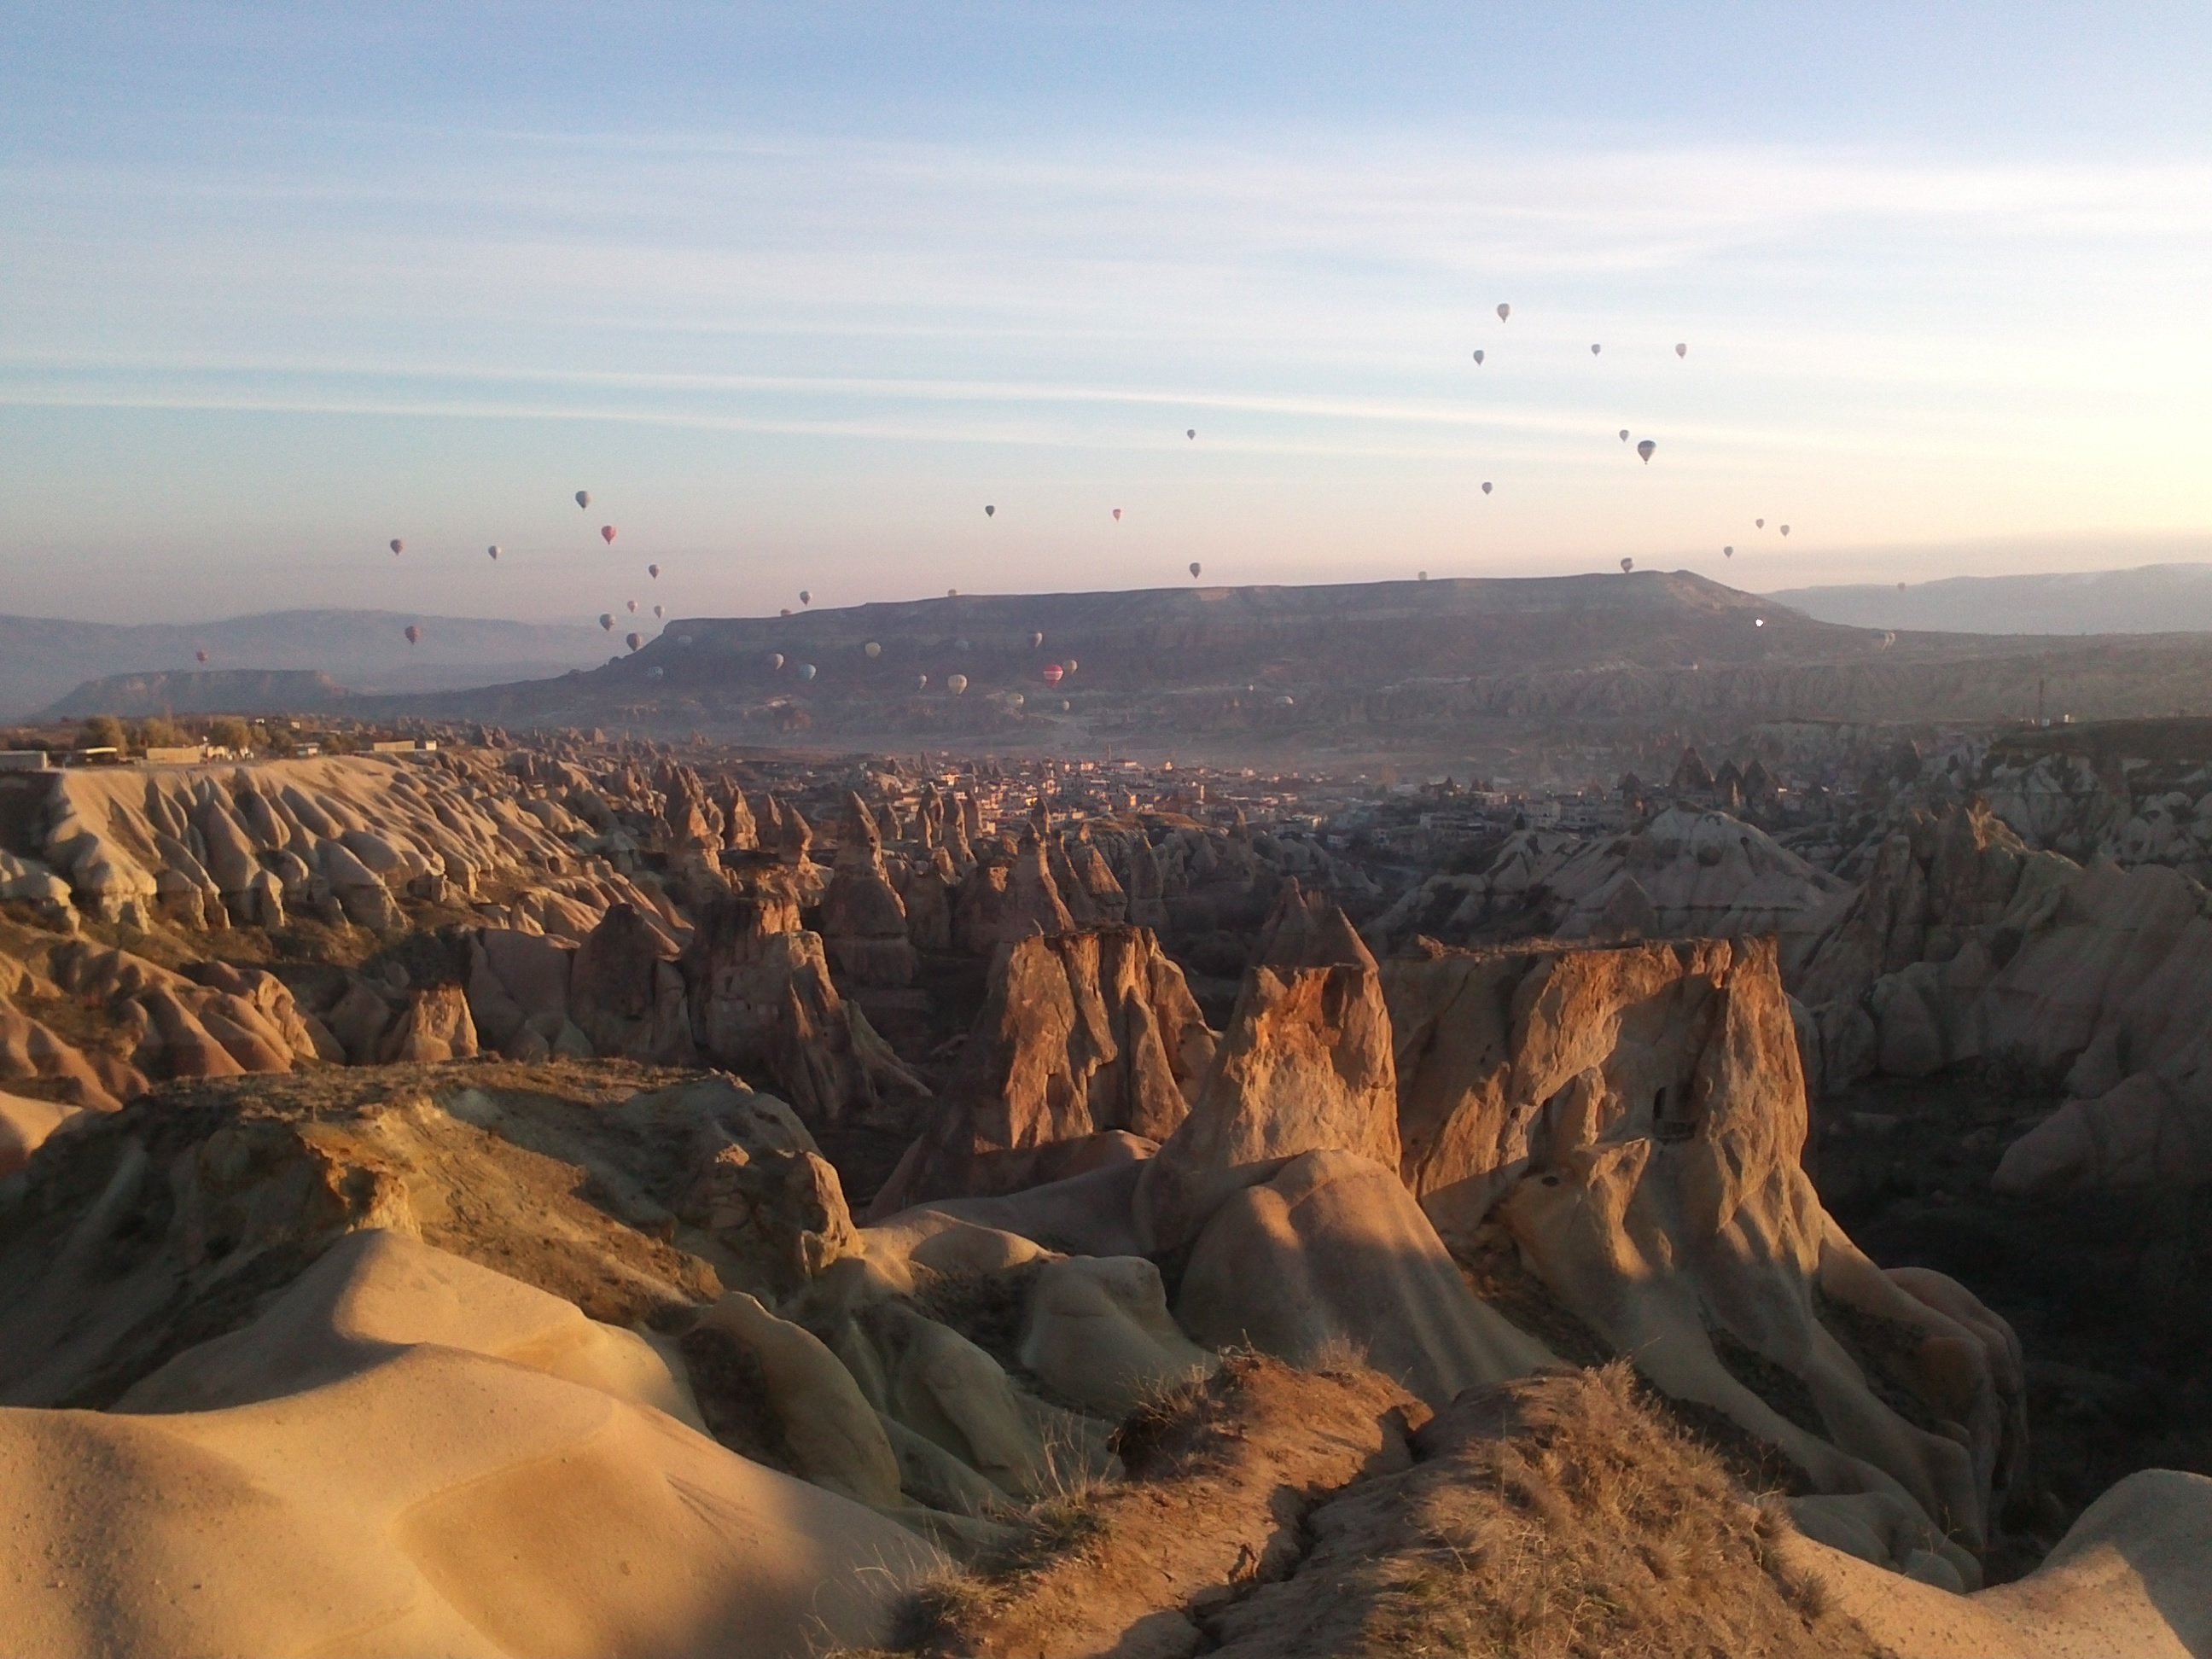 Cappadoccia is a place that will become your new favourite. Its magic cannot be described.